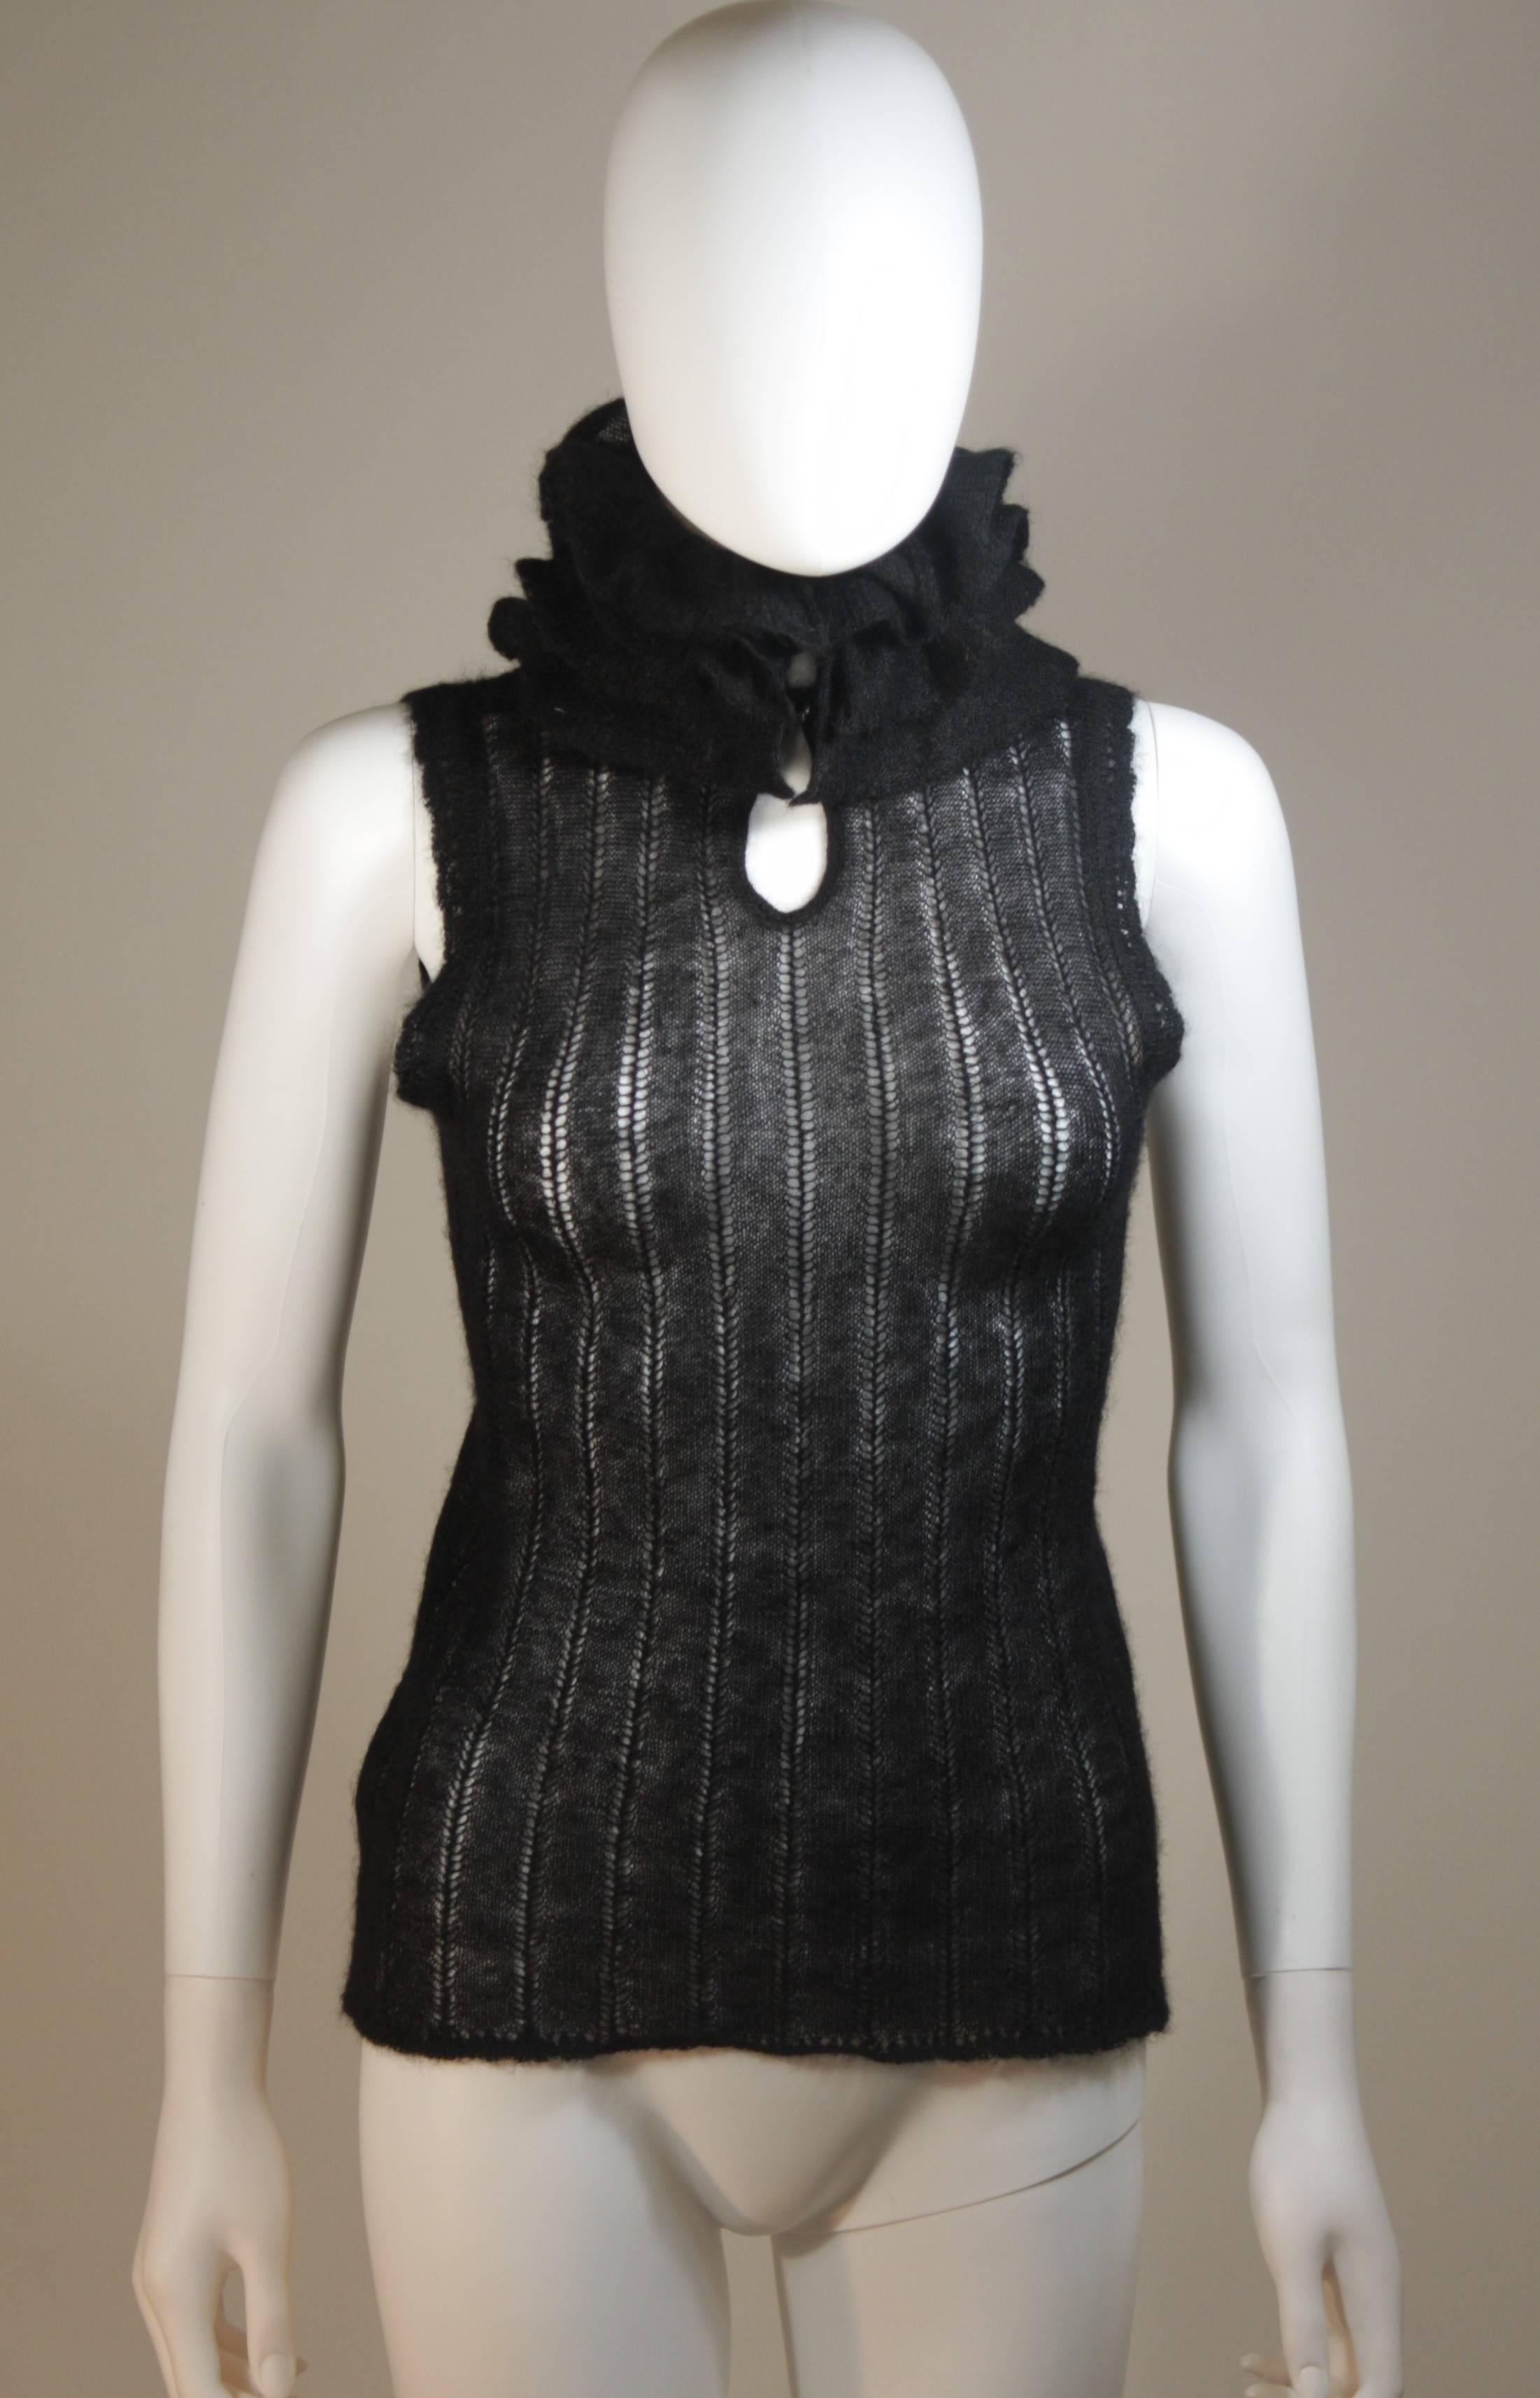 This Chanel dress is composed of a light weight black mohair blend. There are center front button closures at the neck. In excellent condition. Made in Italy.

  **Please cross-reference measurements for personal accuracy. 

Measurements